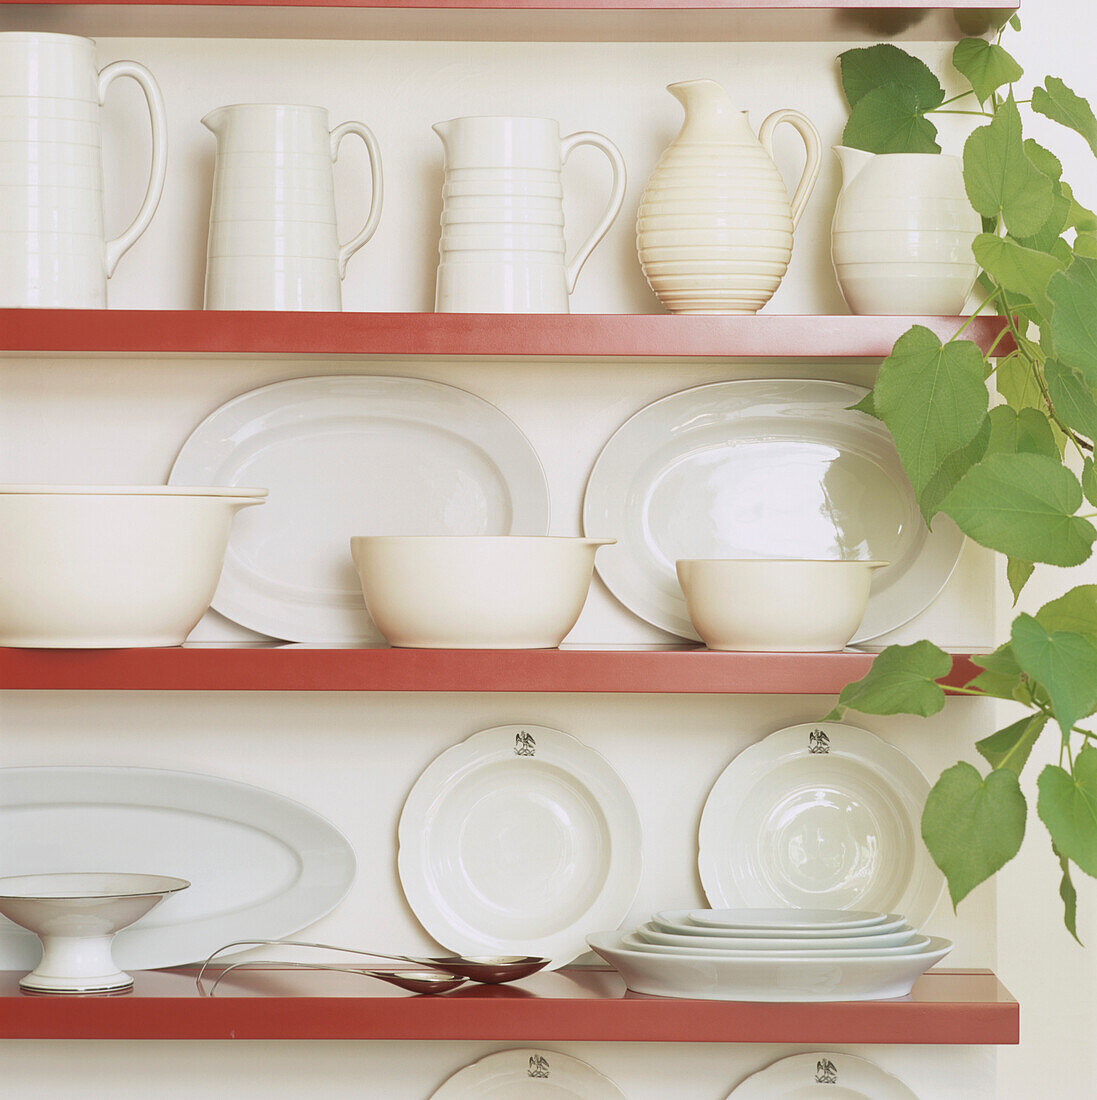 White jugs and dinner service on red lacquered shelving  